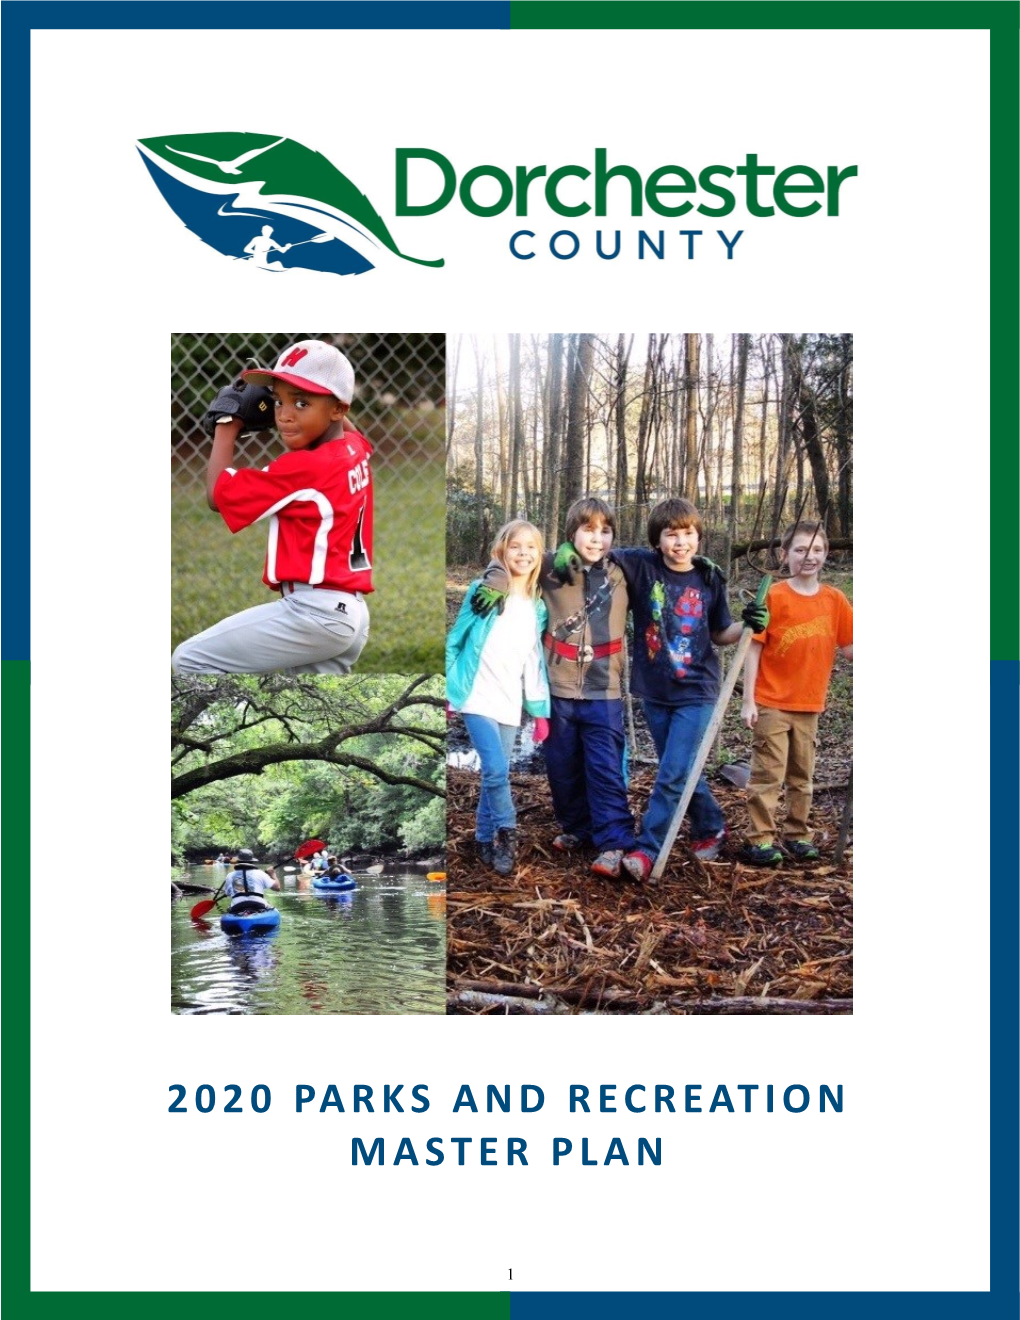 2020 Parks and Recreation Master Plan